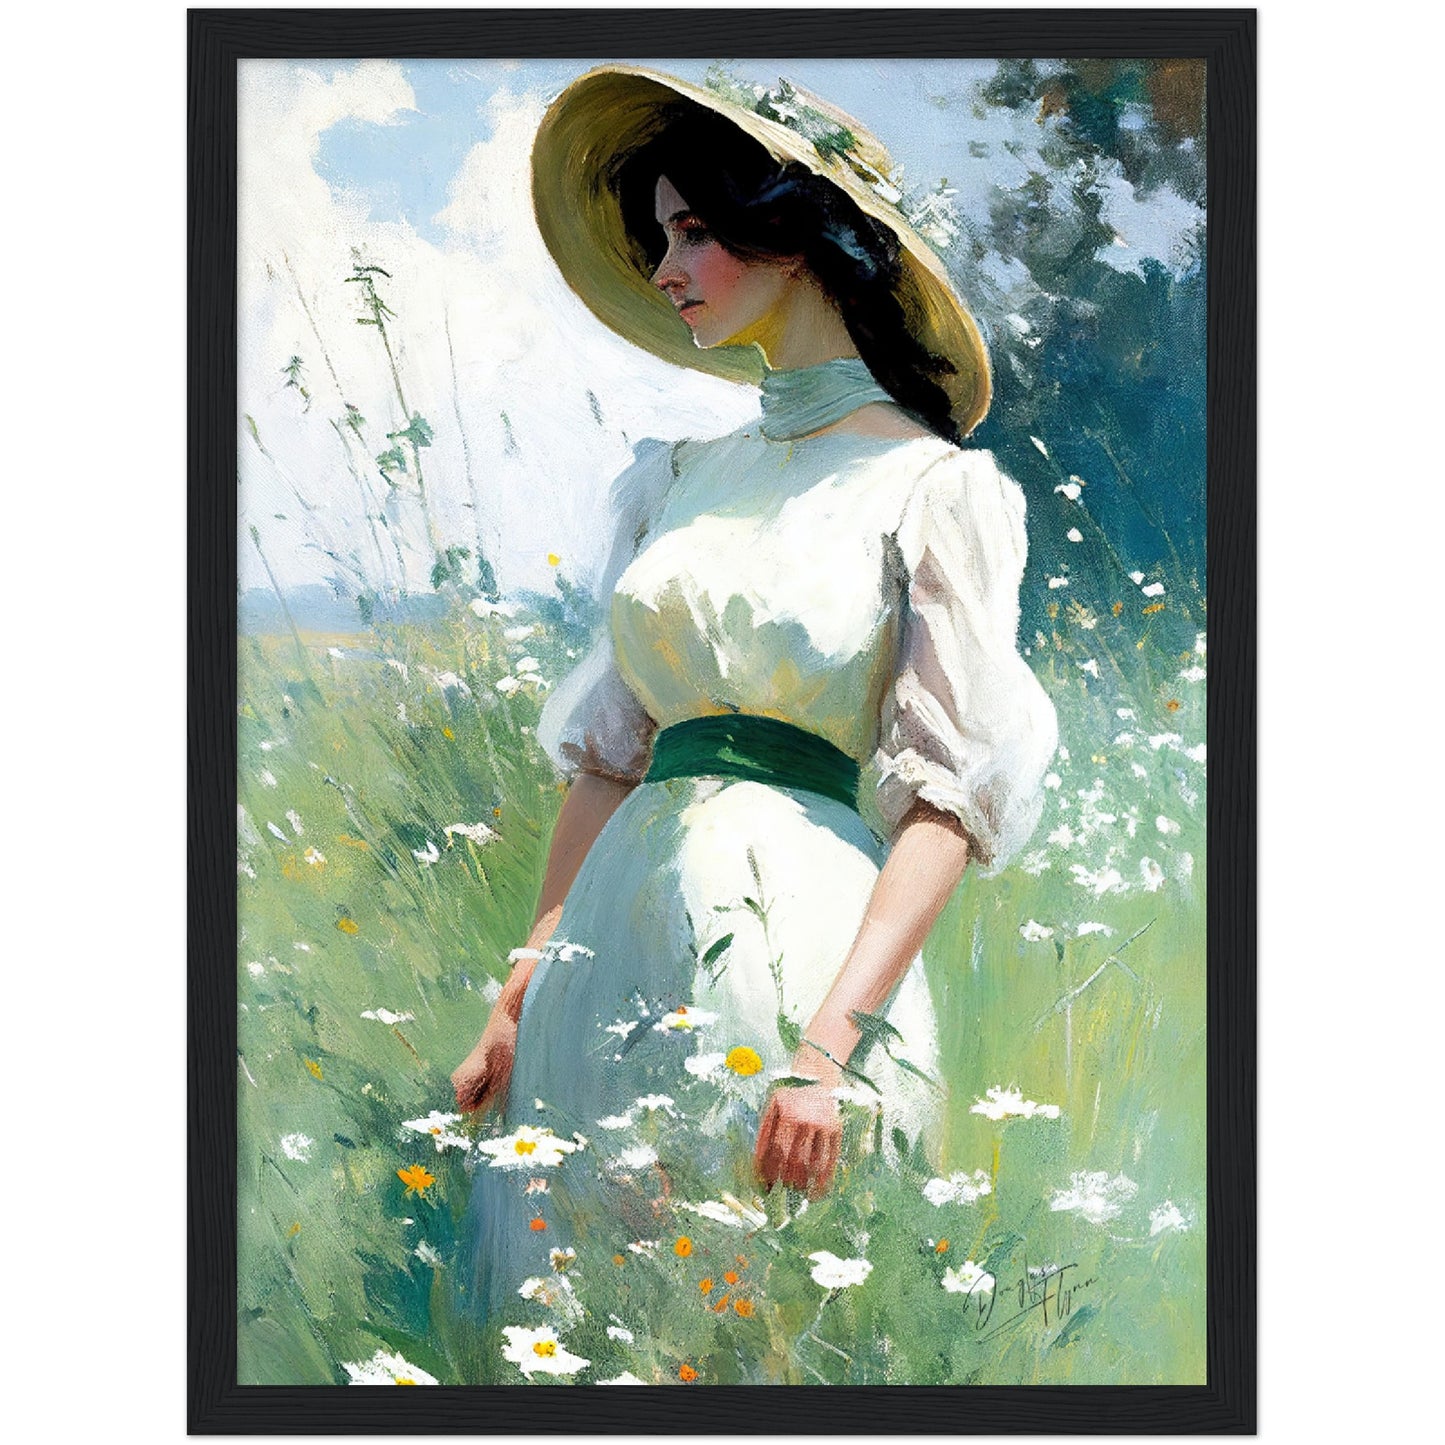 »Ava And Wildflowers« retro poster